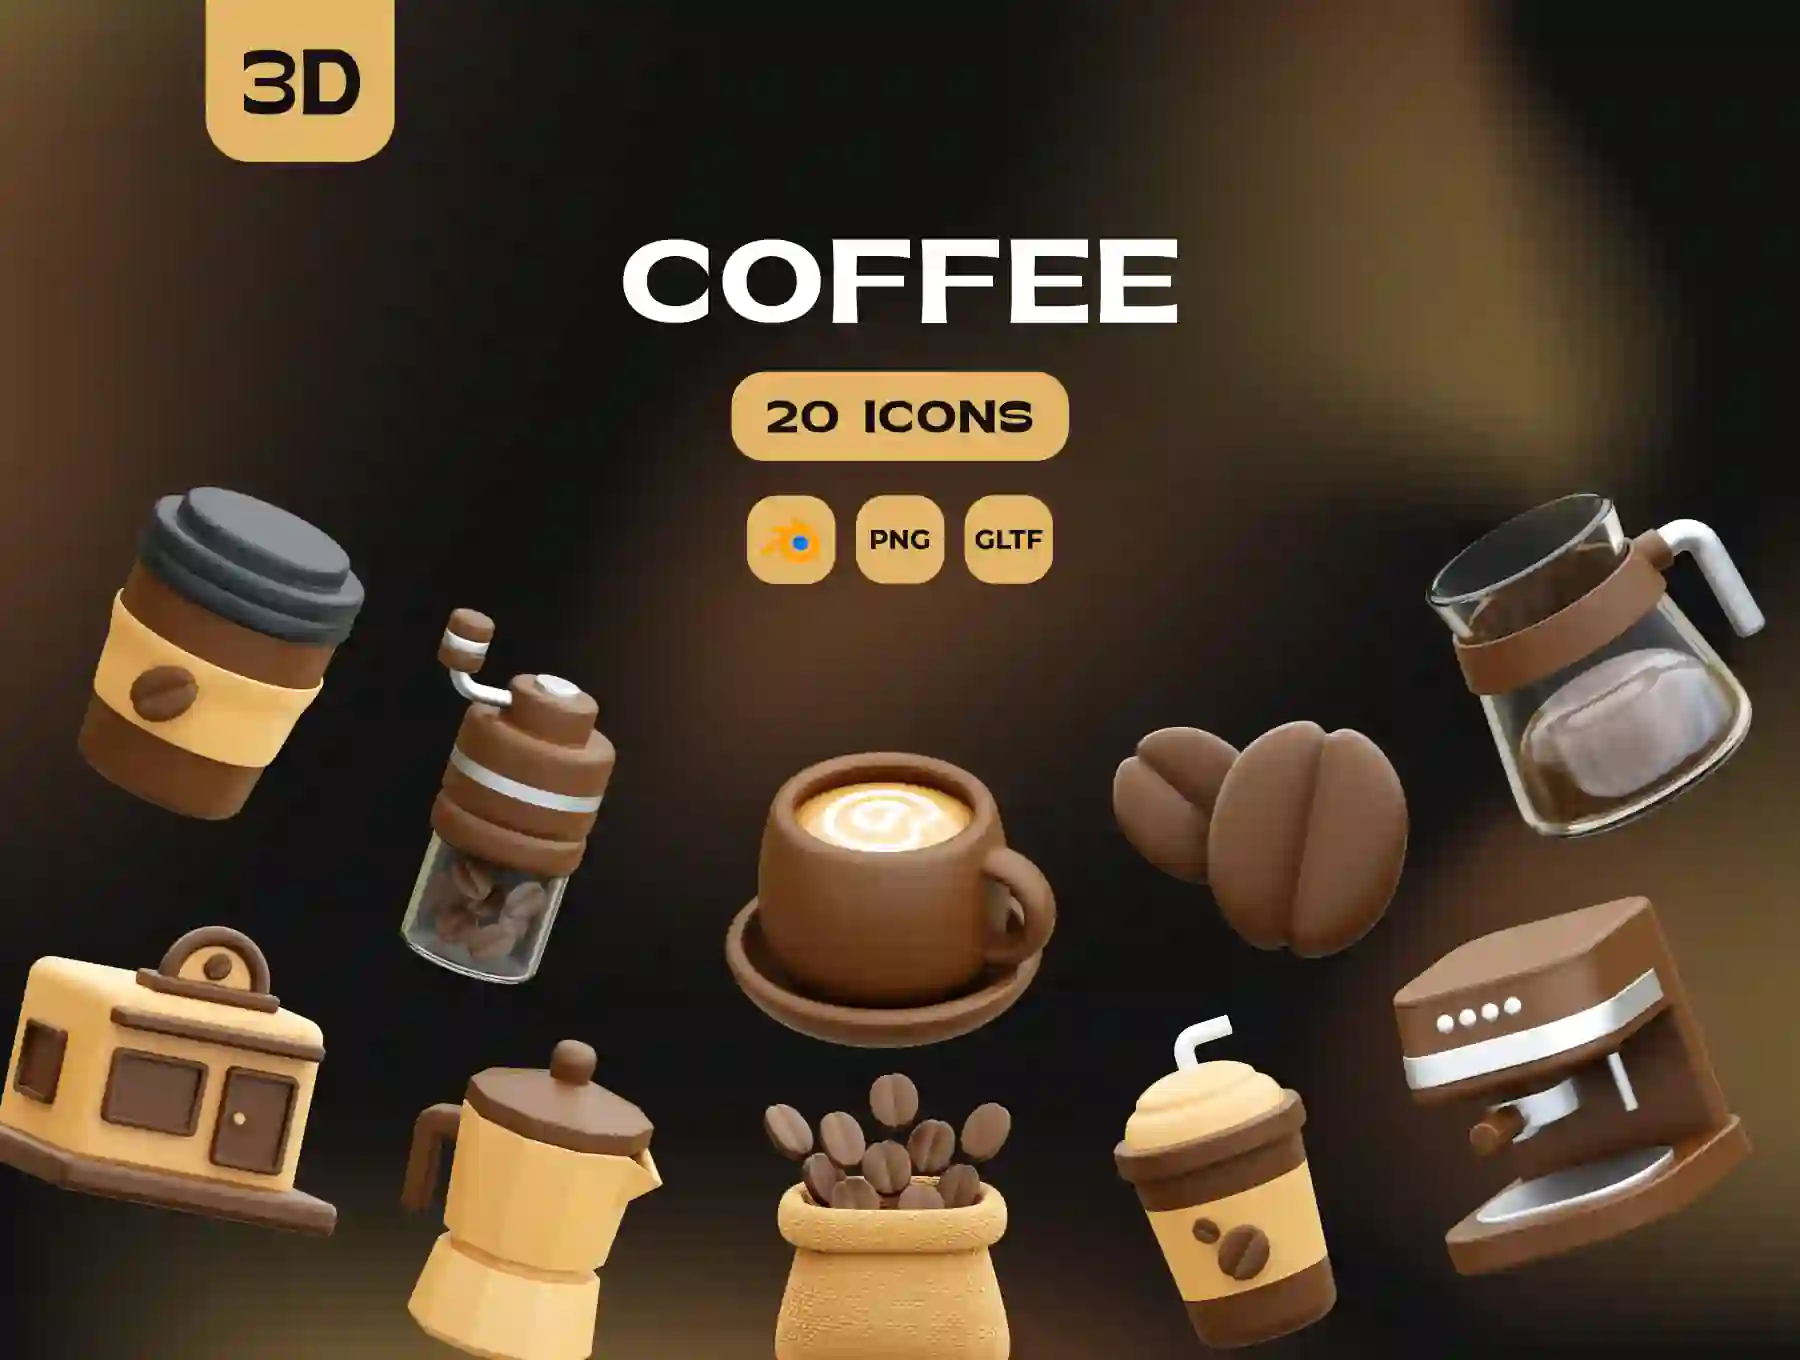 Coffee 3D Icons